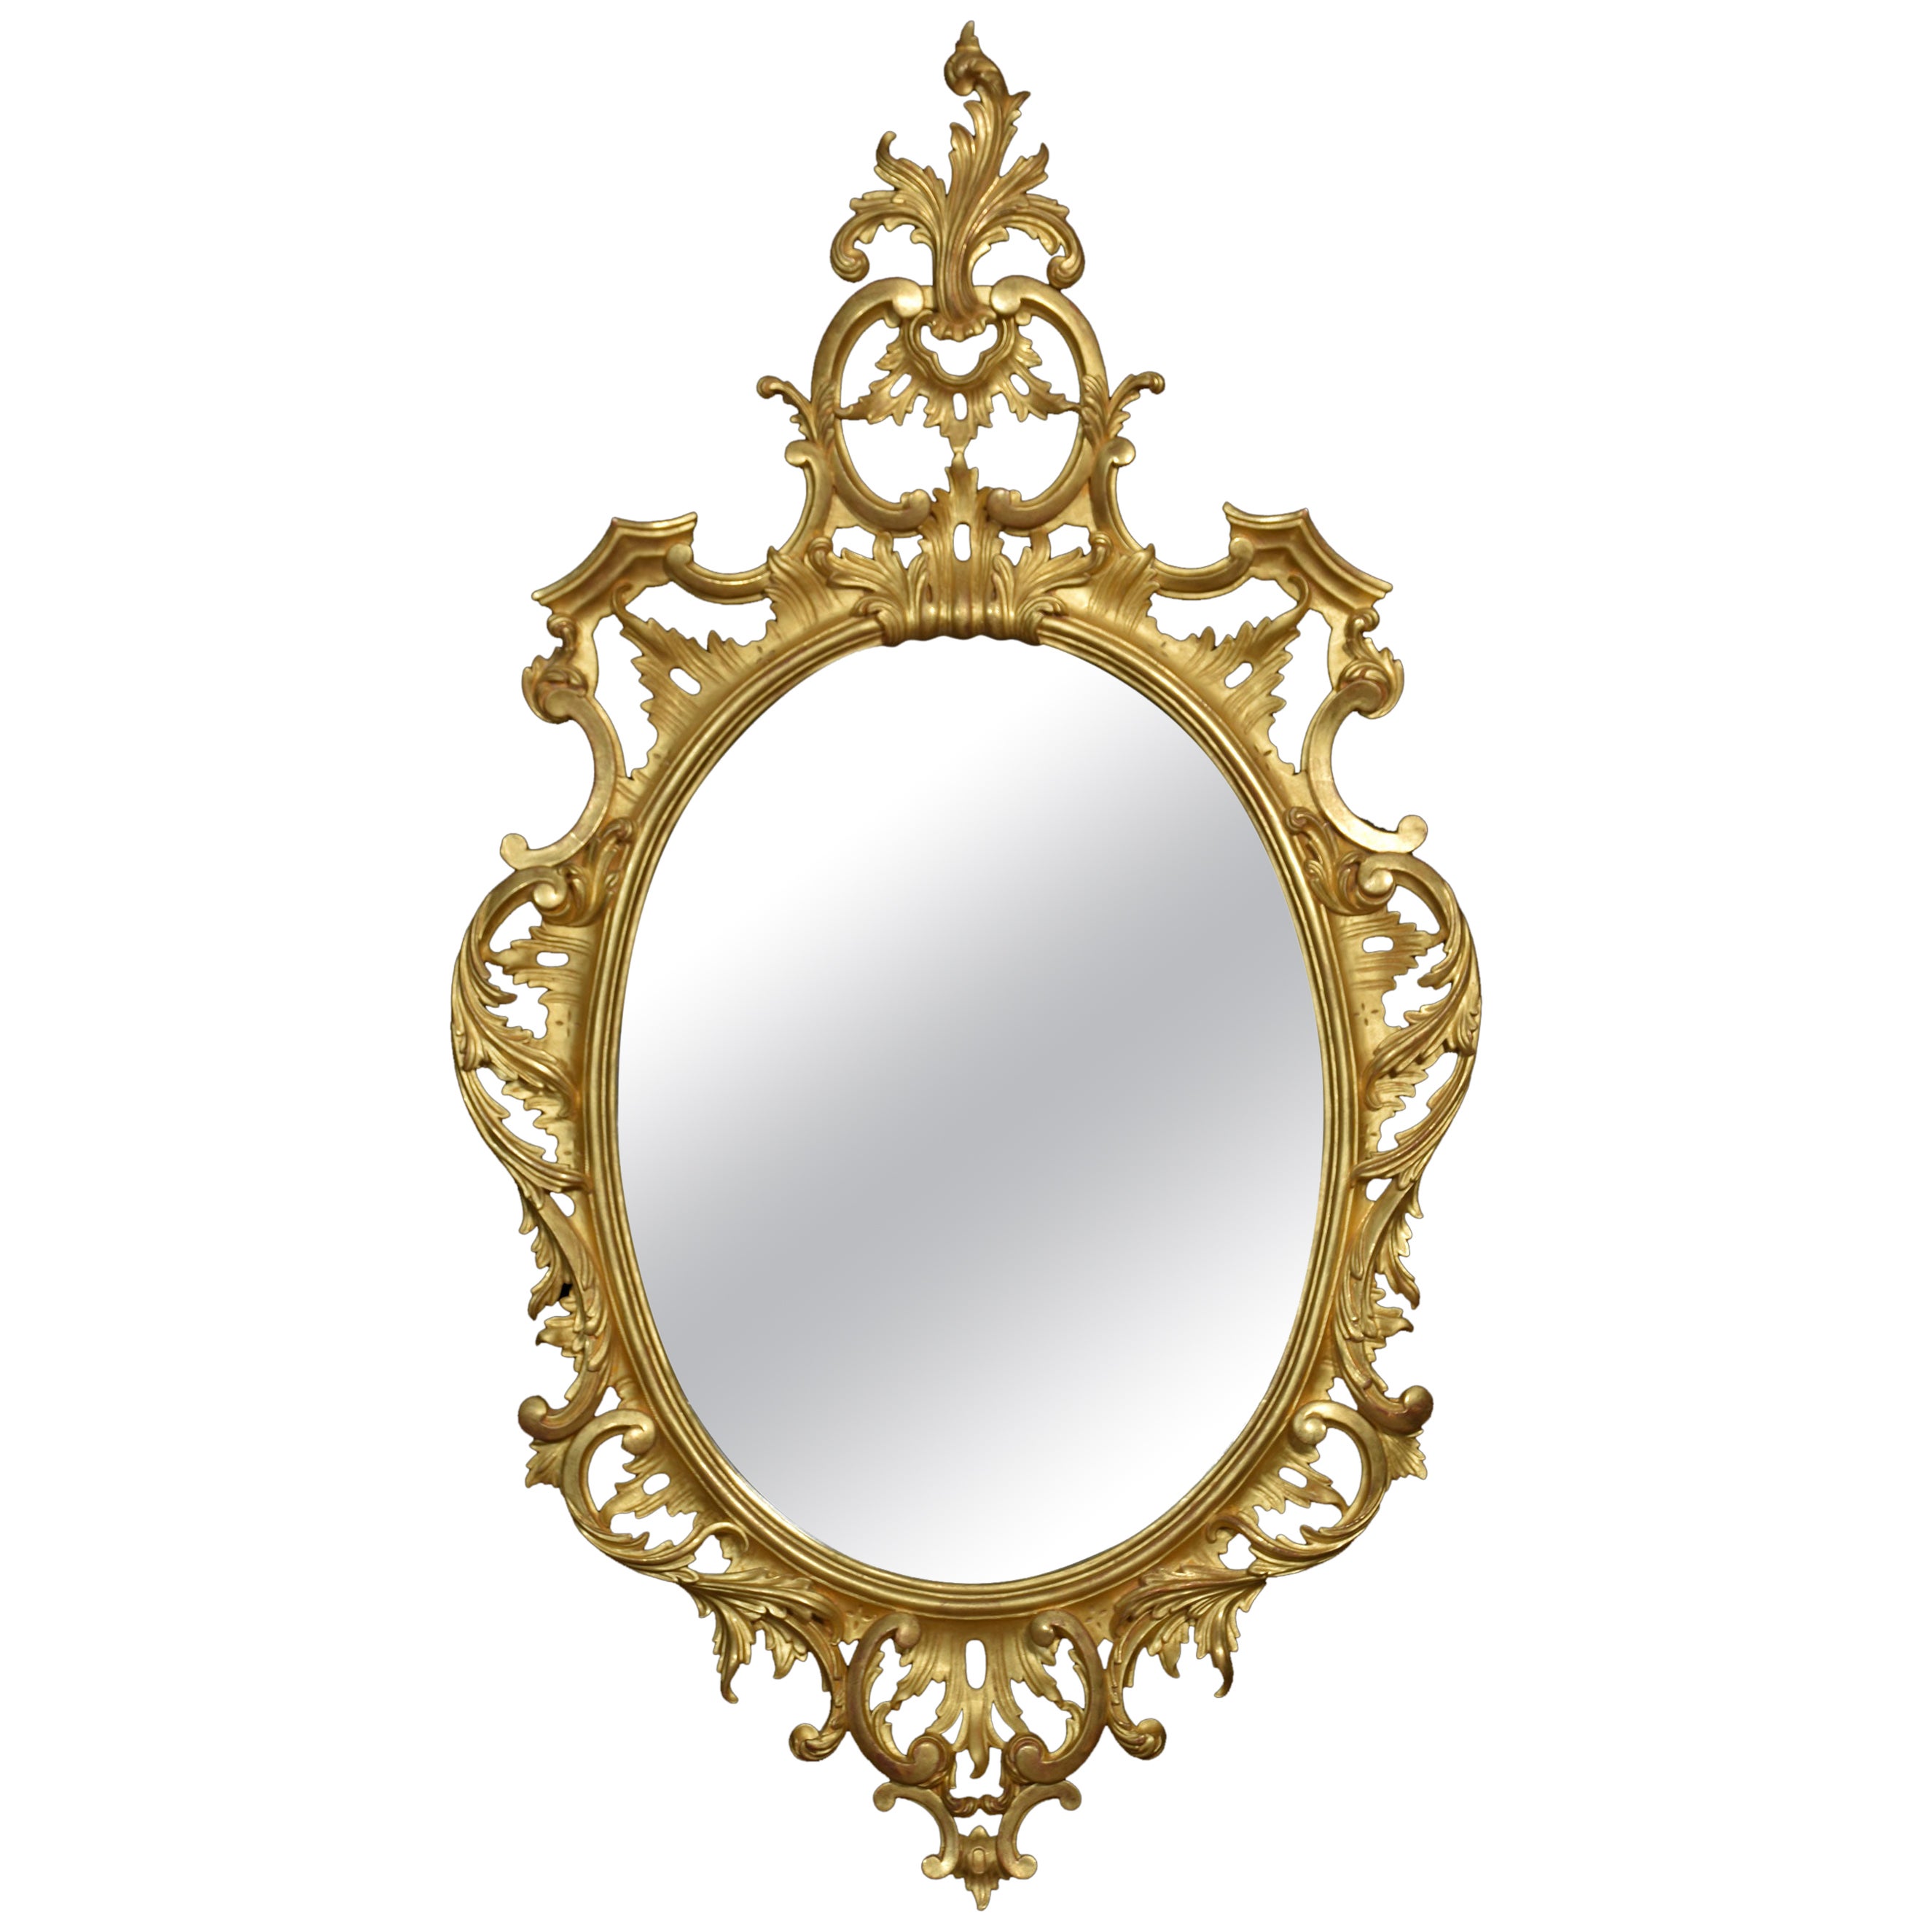 Carved gilt-wood oval wall mirror